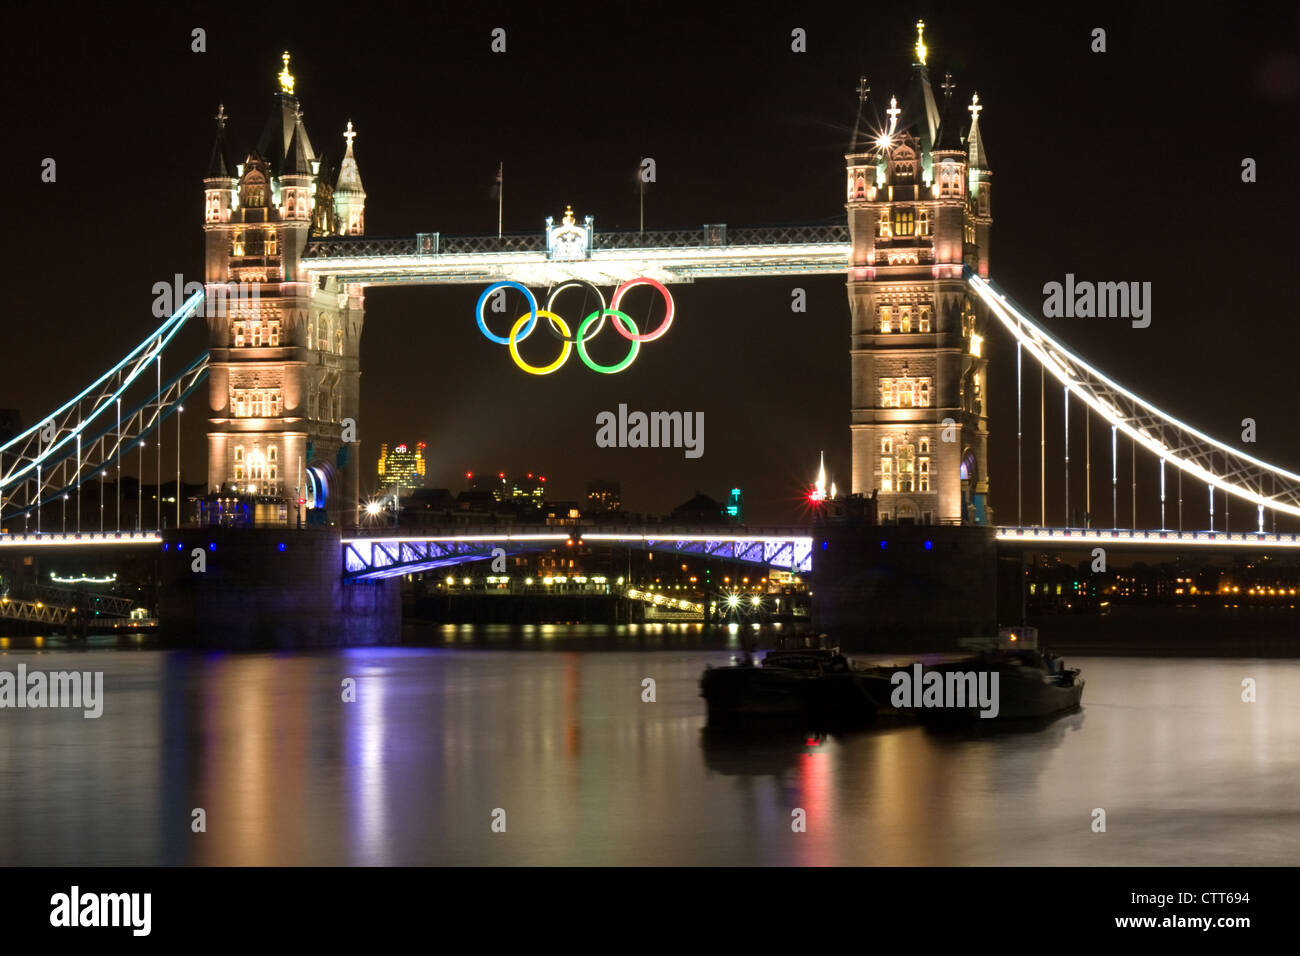 Olympic rings hanging from Tower Bridge during the London 2012 Olympic games Stock Photo